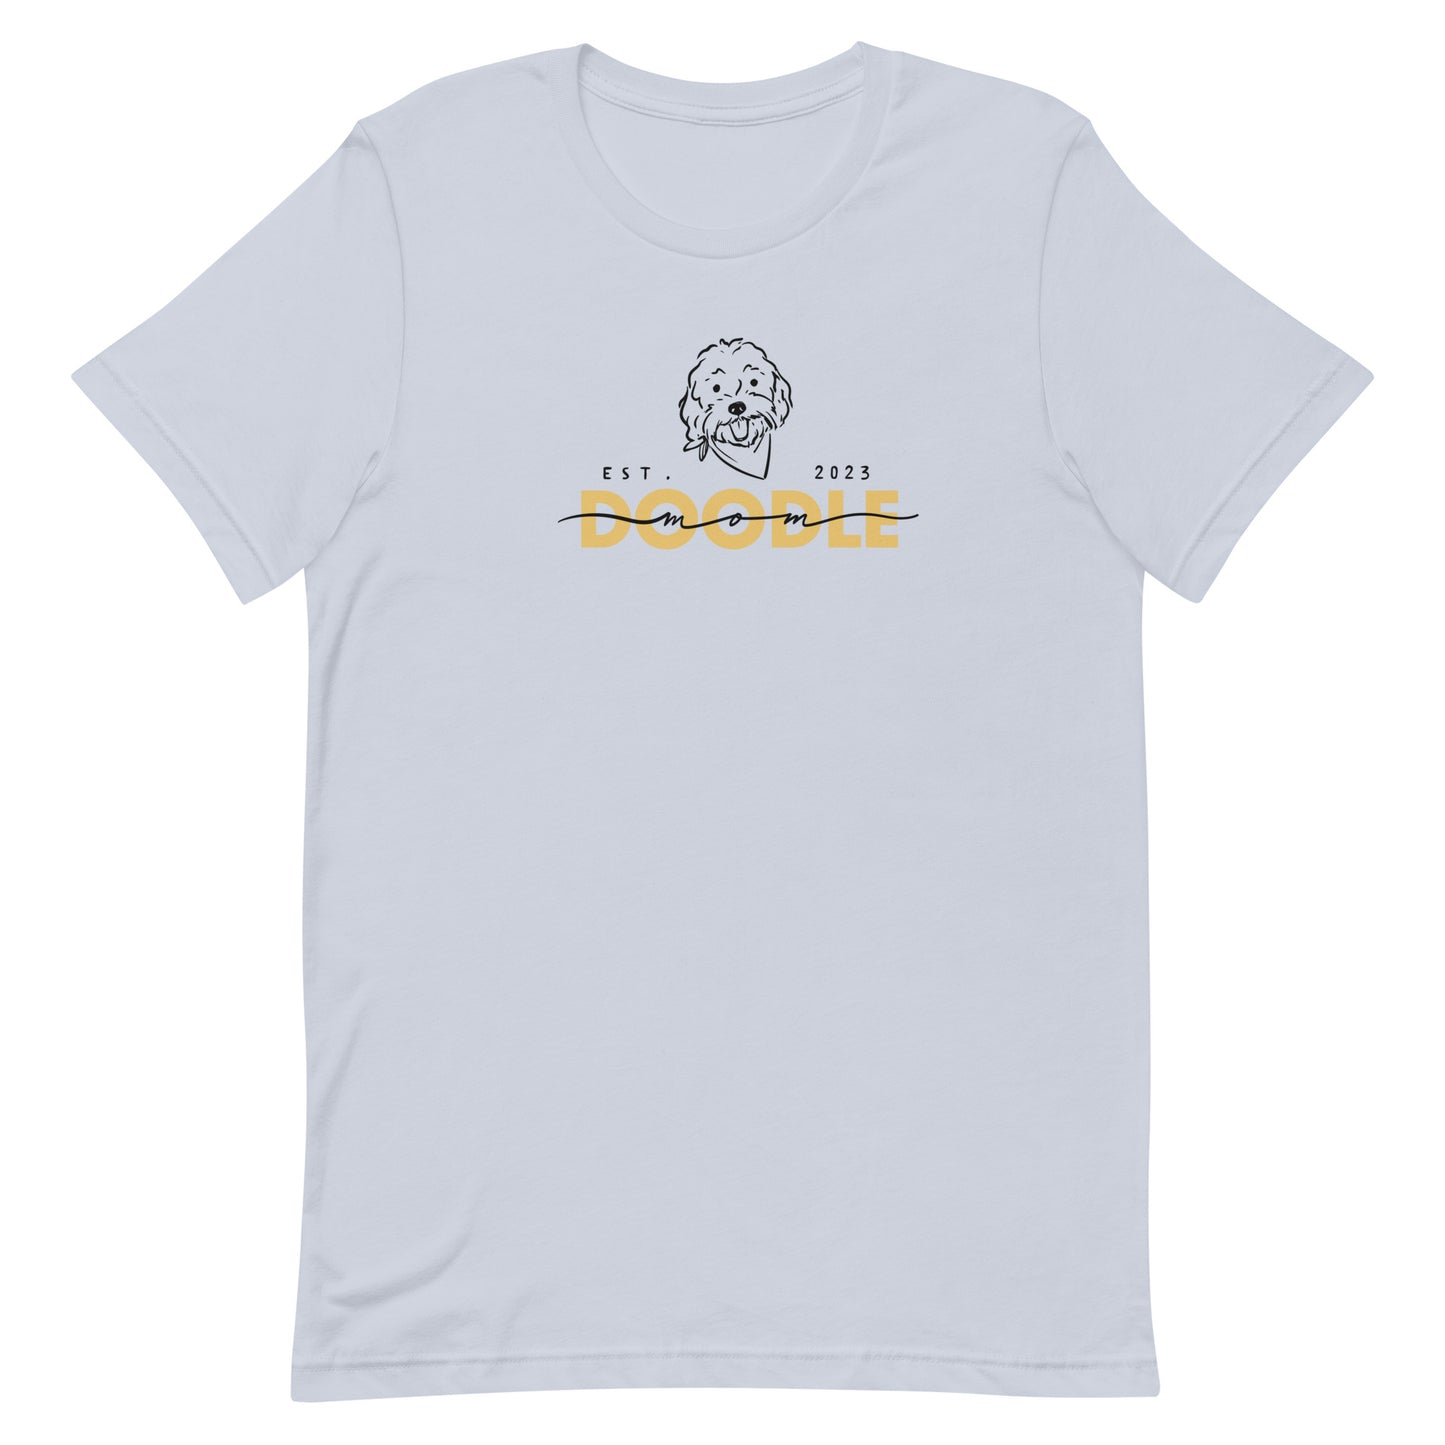 Goldendoodle Mom t-shirt with Goldendoodle face and words "Doodle Mom Est 2023" in light blue  color